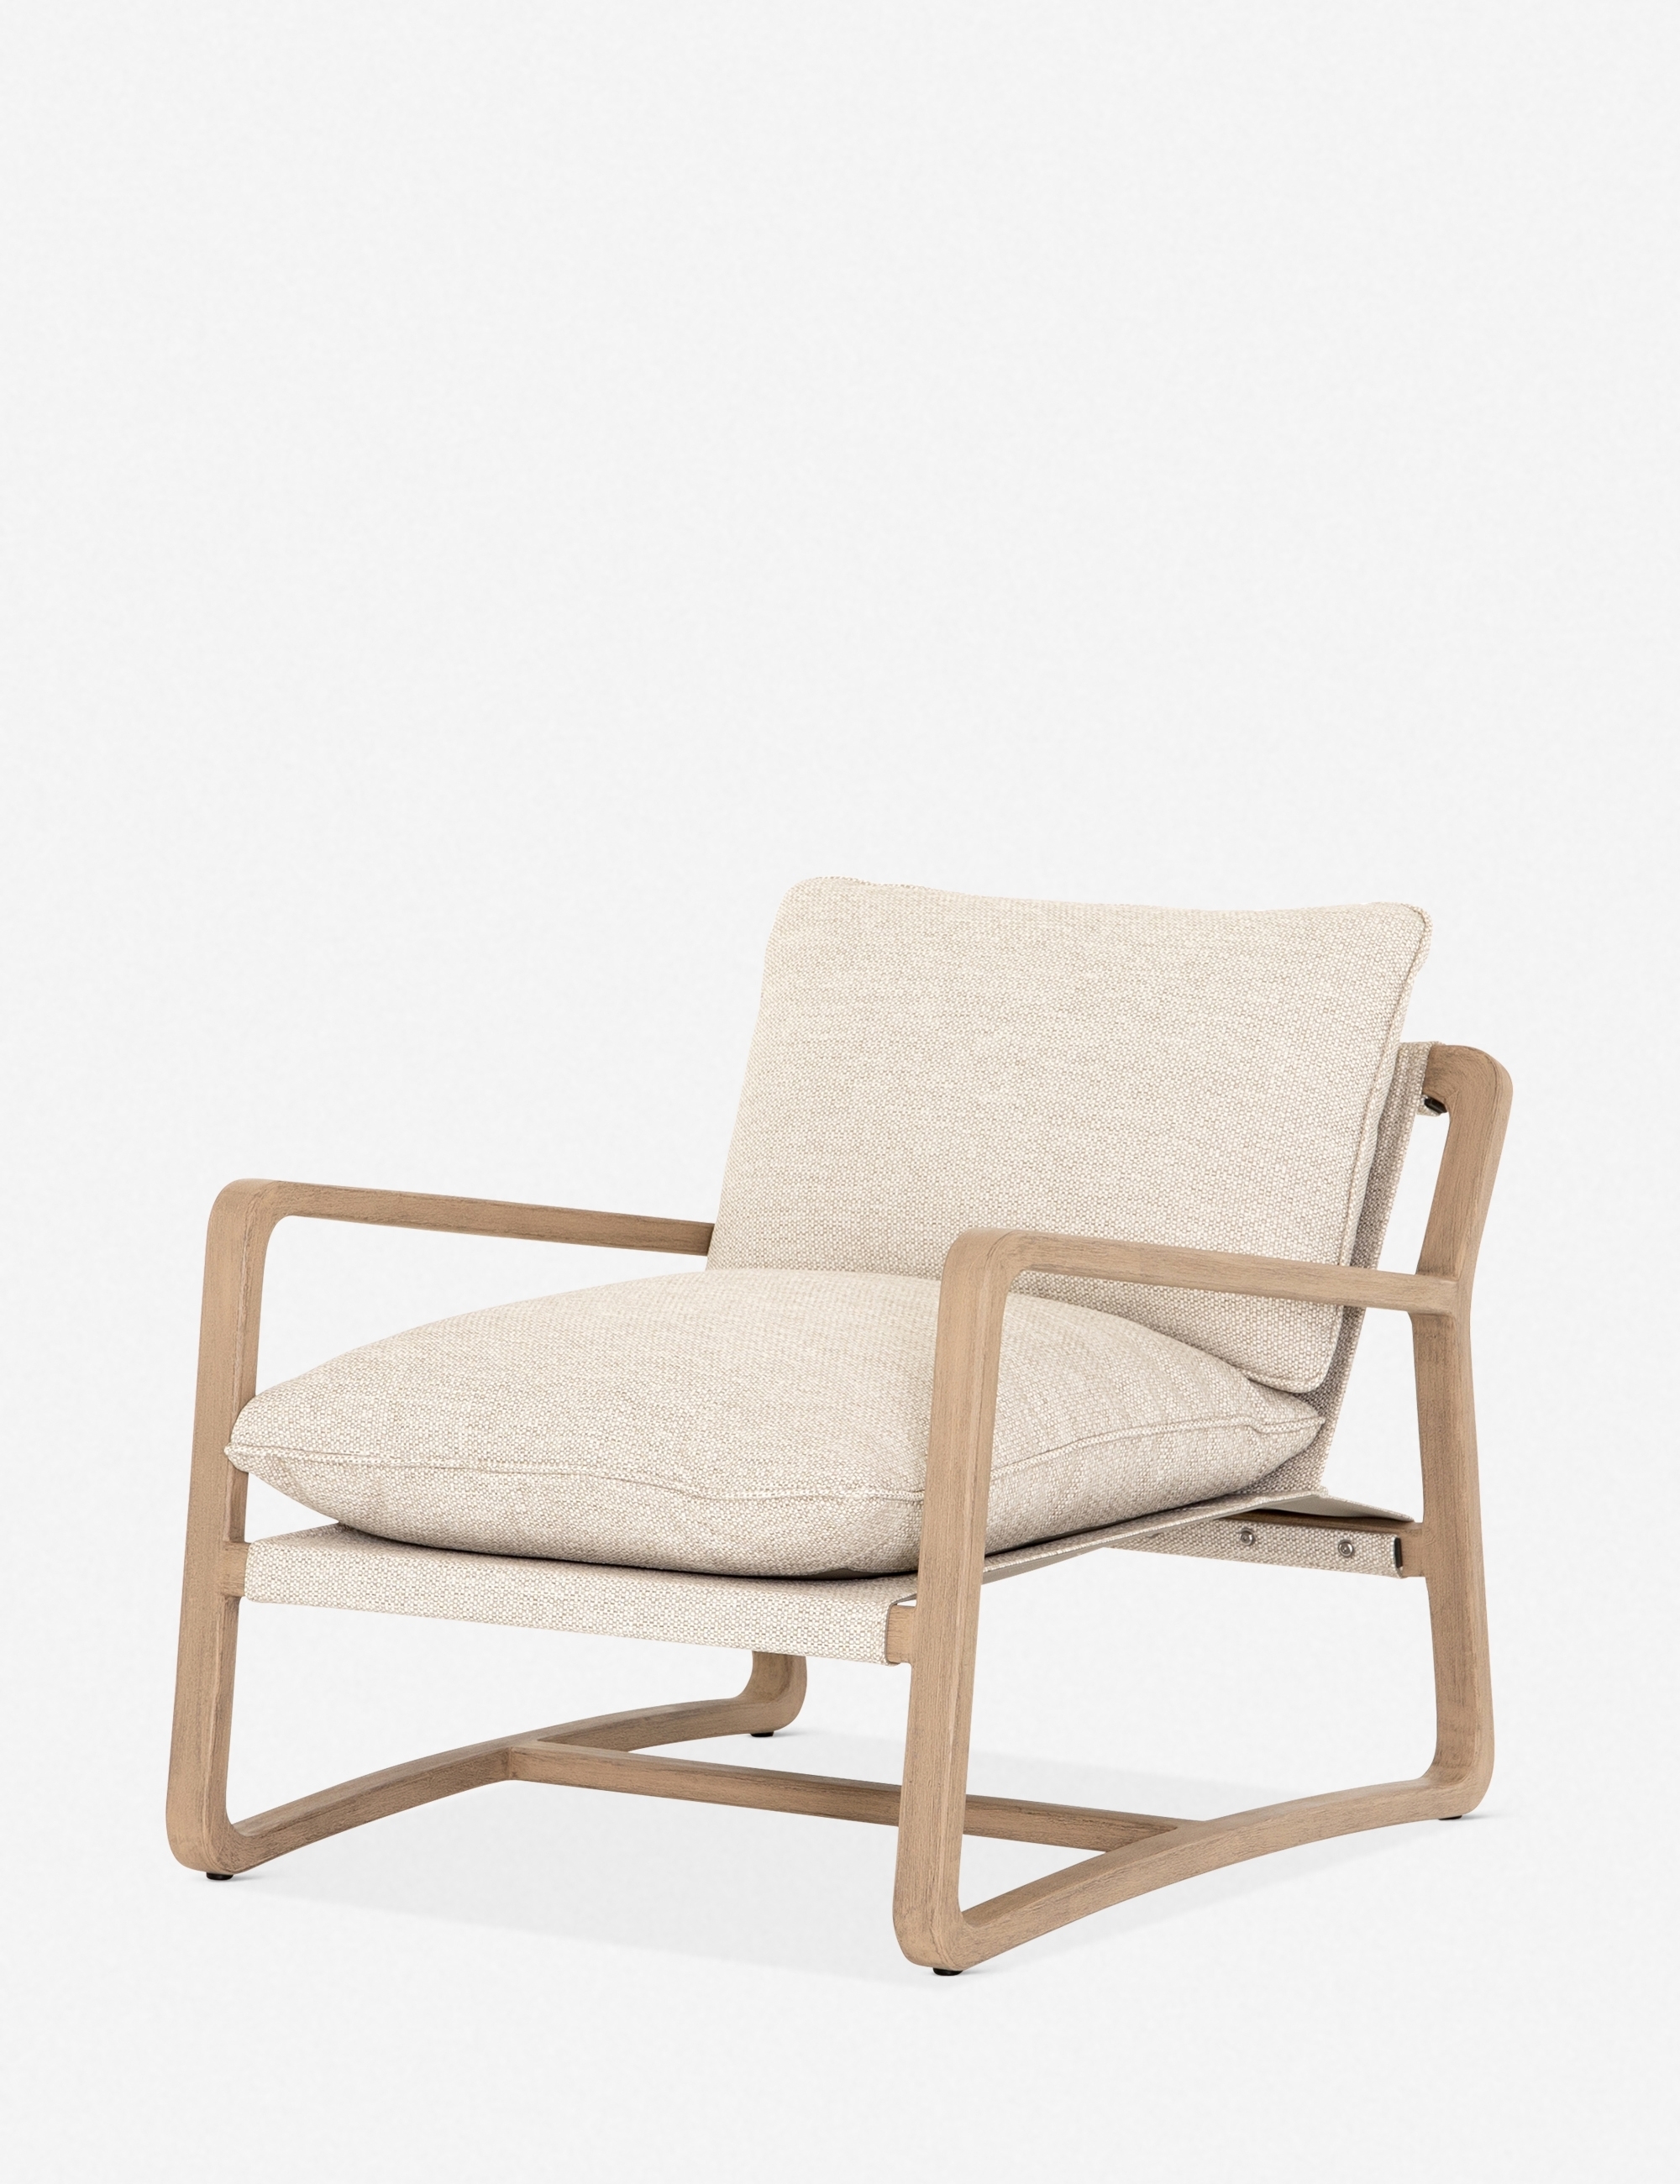 Nunelle Indoor / Outdoor Accent Chair - Image 8